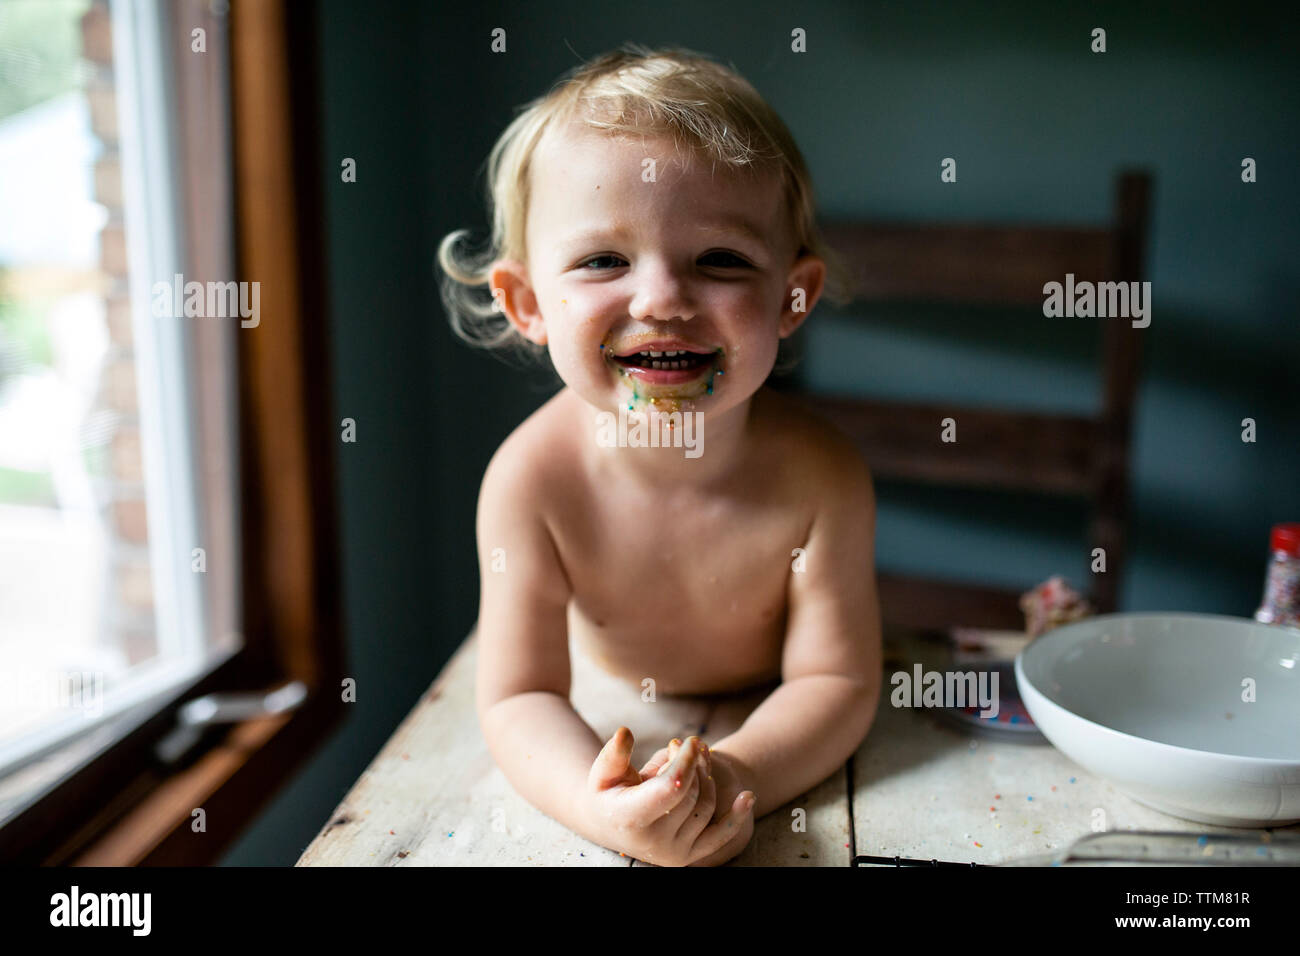 Toddler girl laughing with messy face after colorful sweet treat Stock Photo